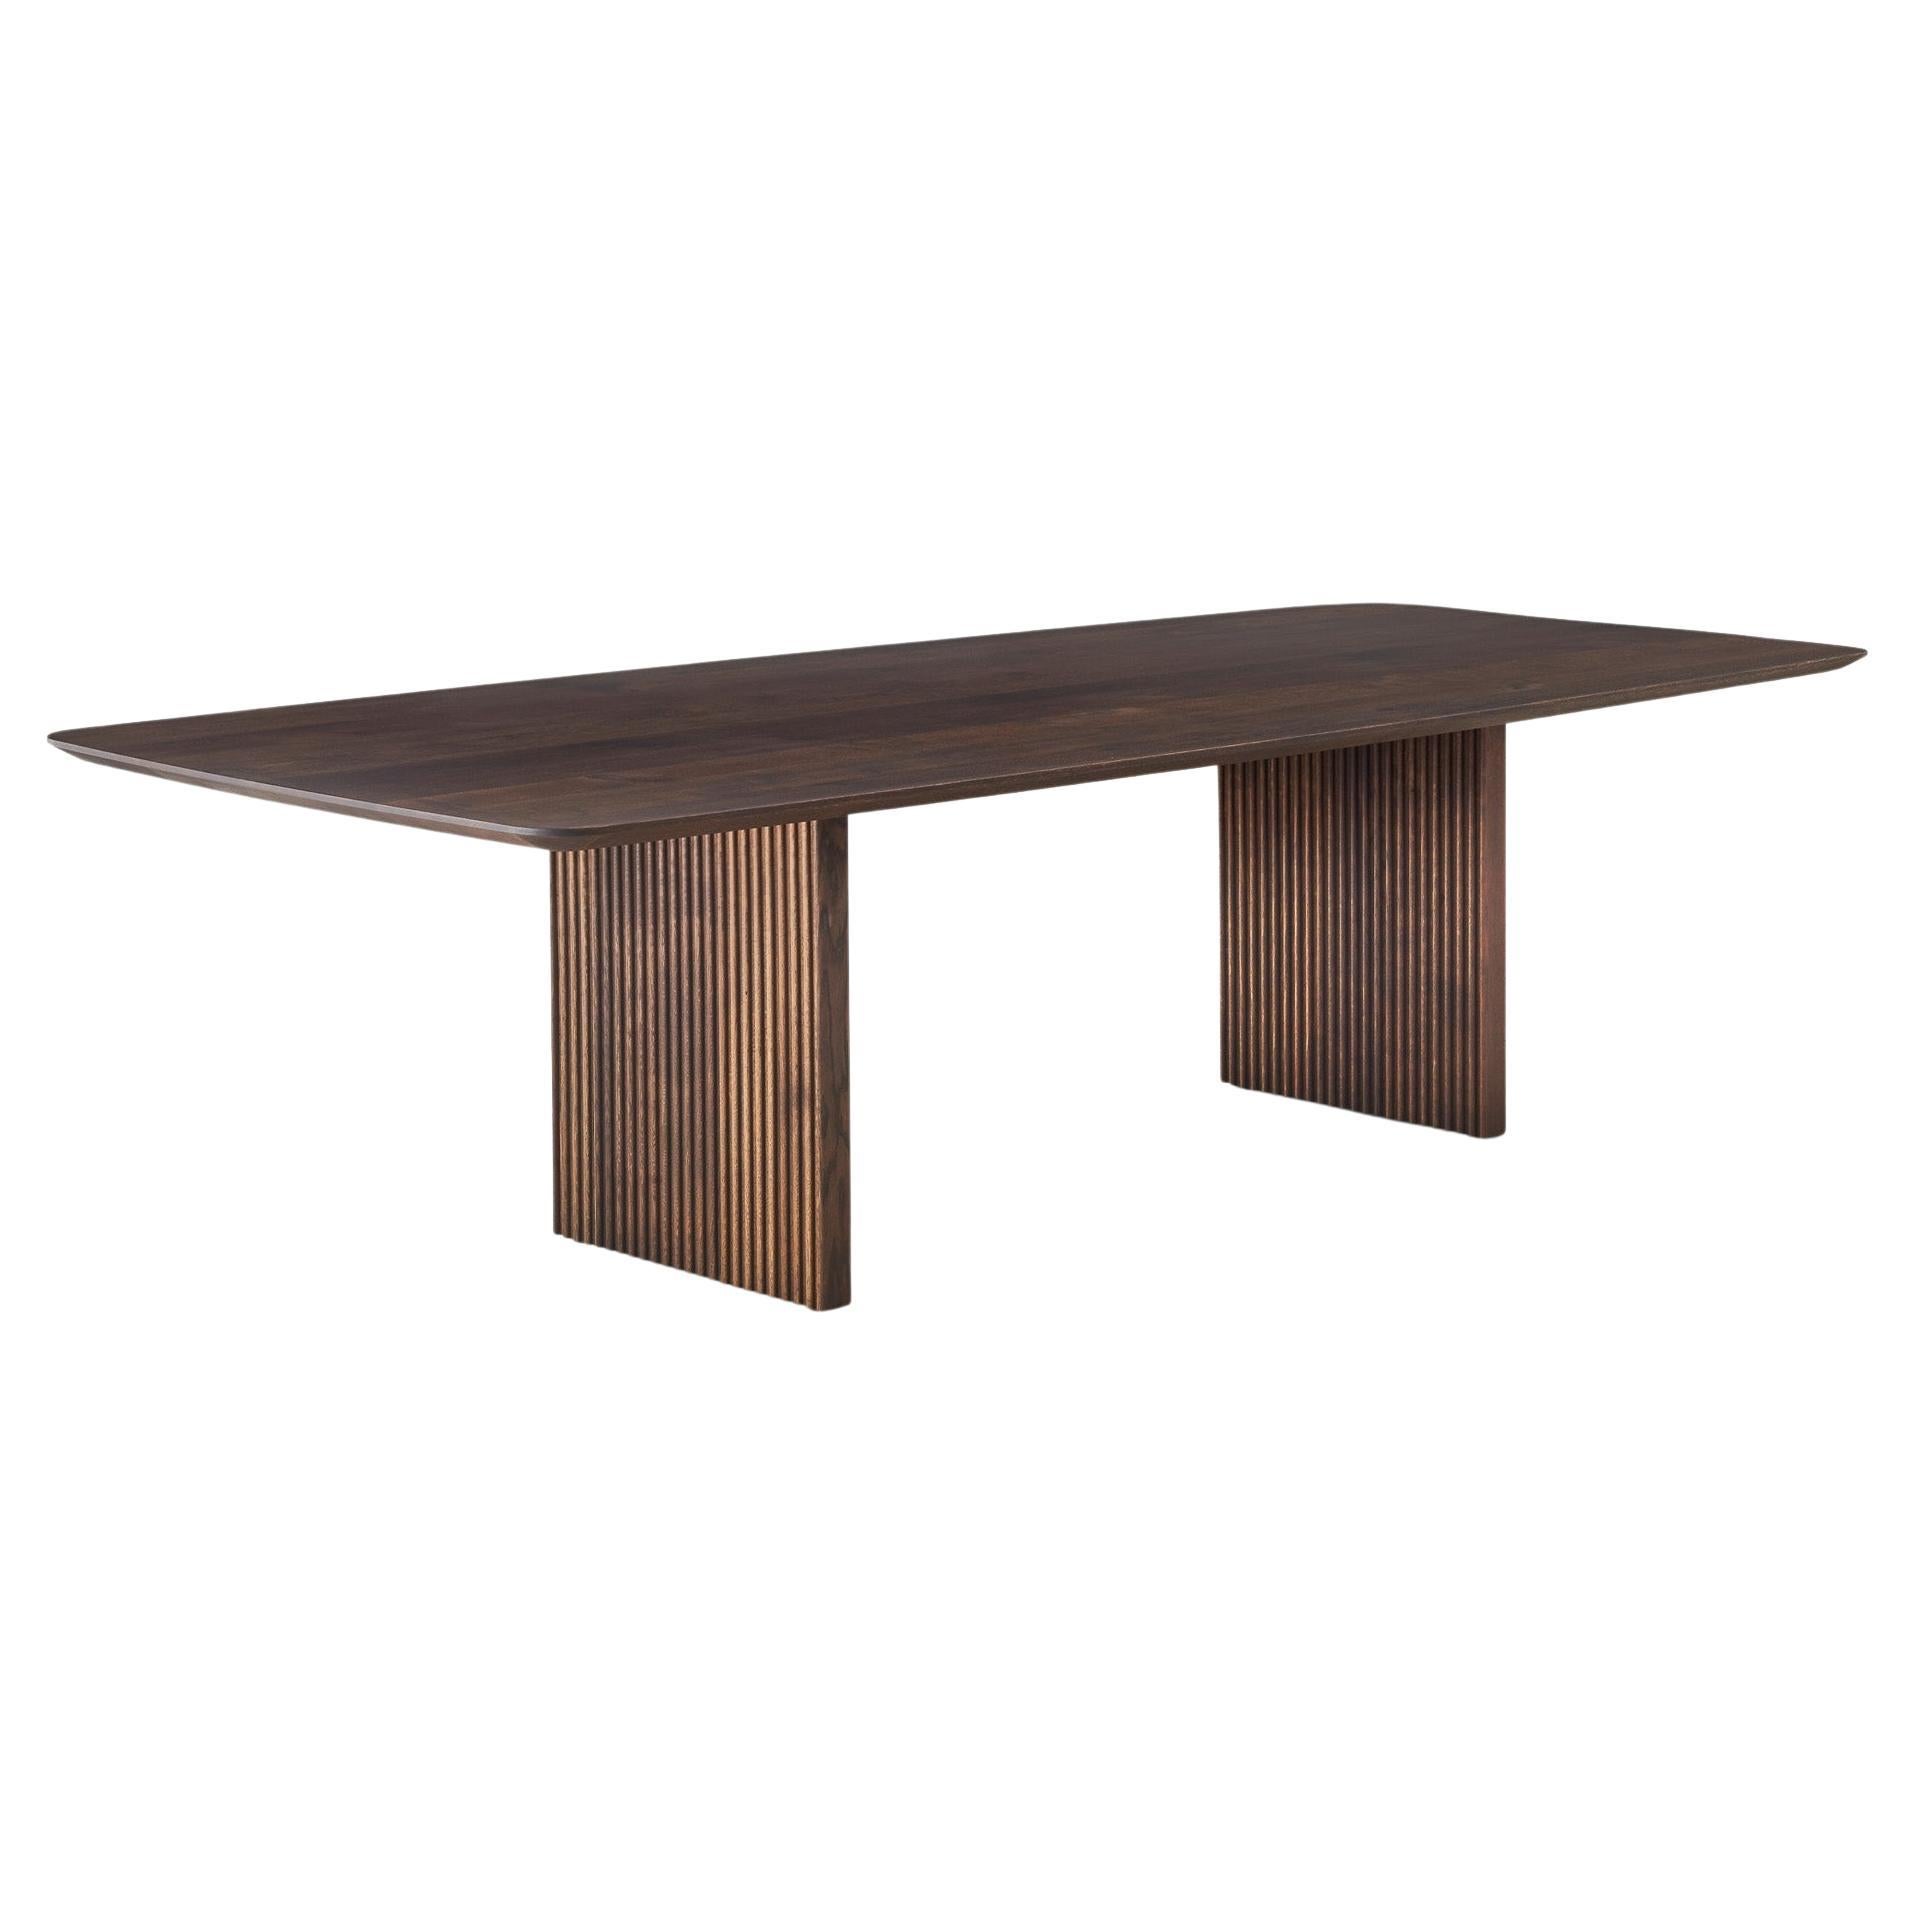 Customizable Dining Table TEN 240, Smoked Oak or Walnut For Sale at 1stDibs